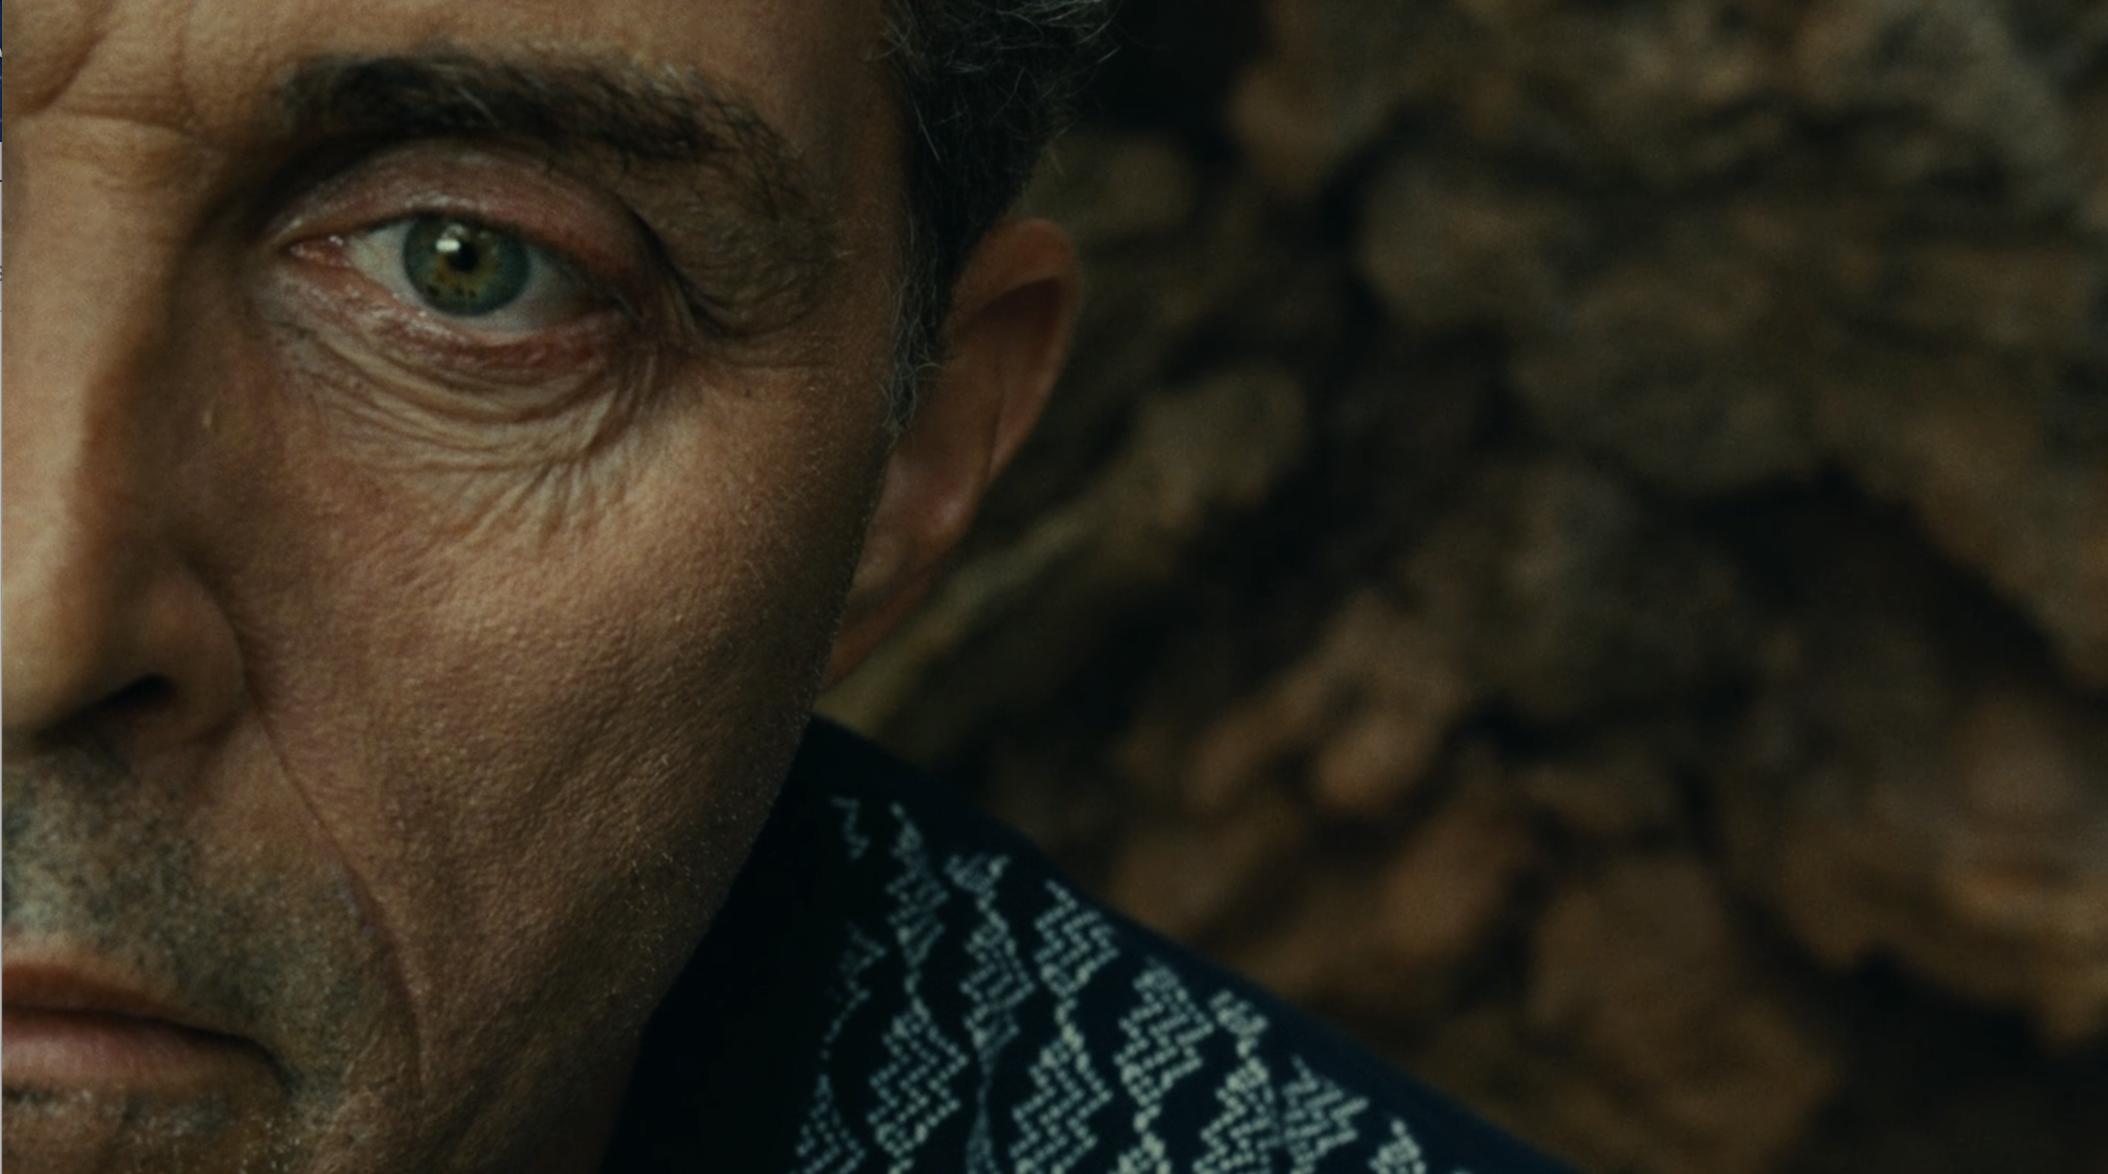 Rufus Sewell wore more makeup in the film Old to appear older.